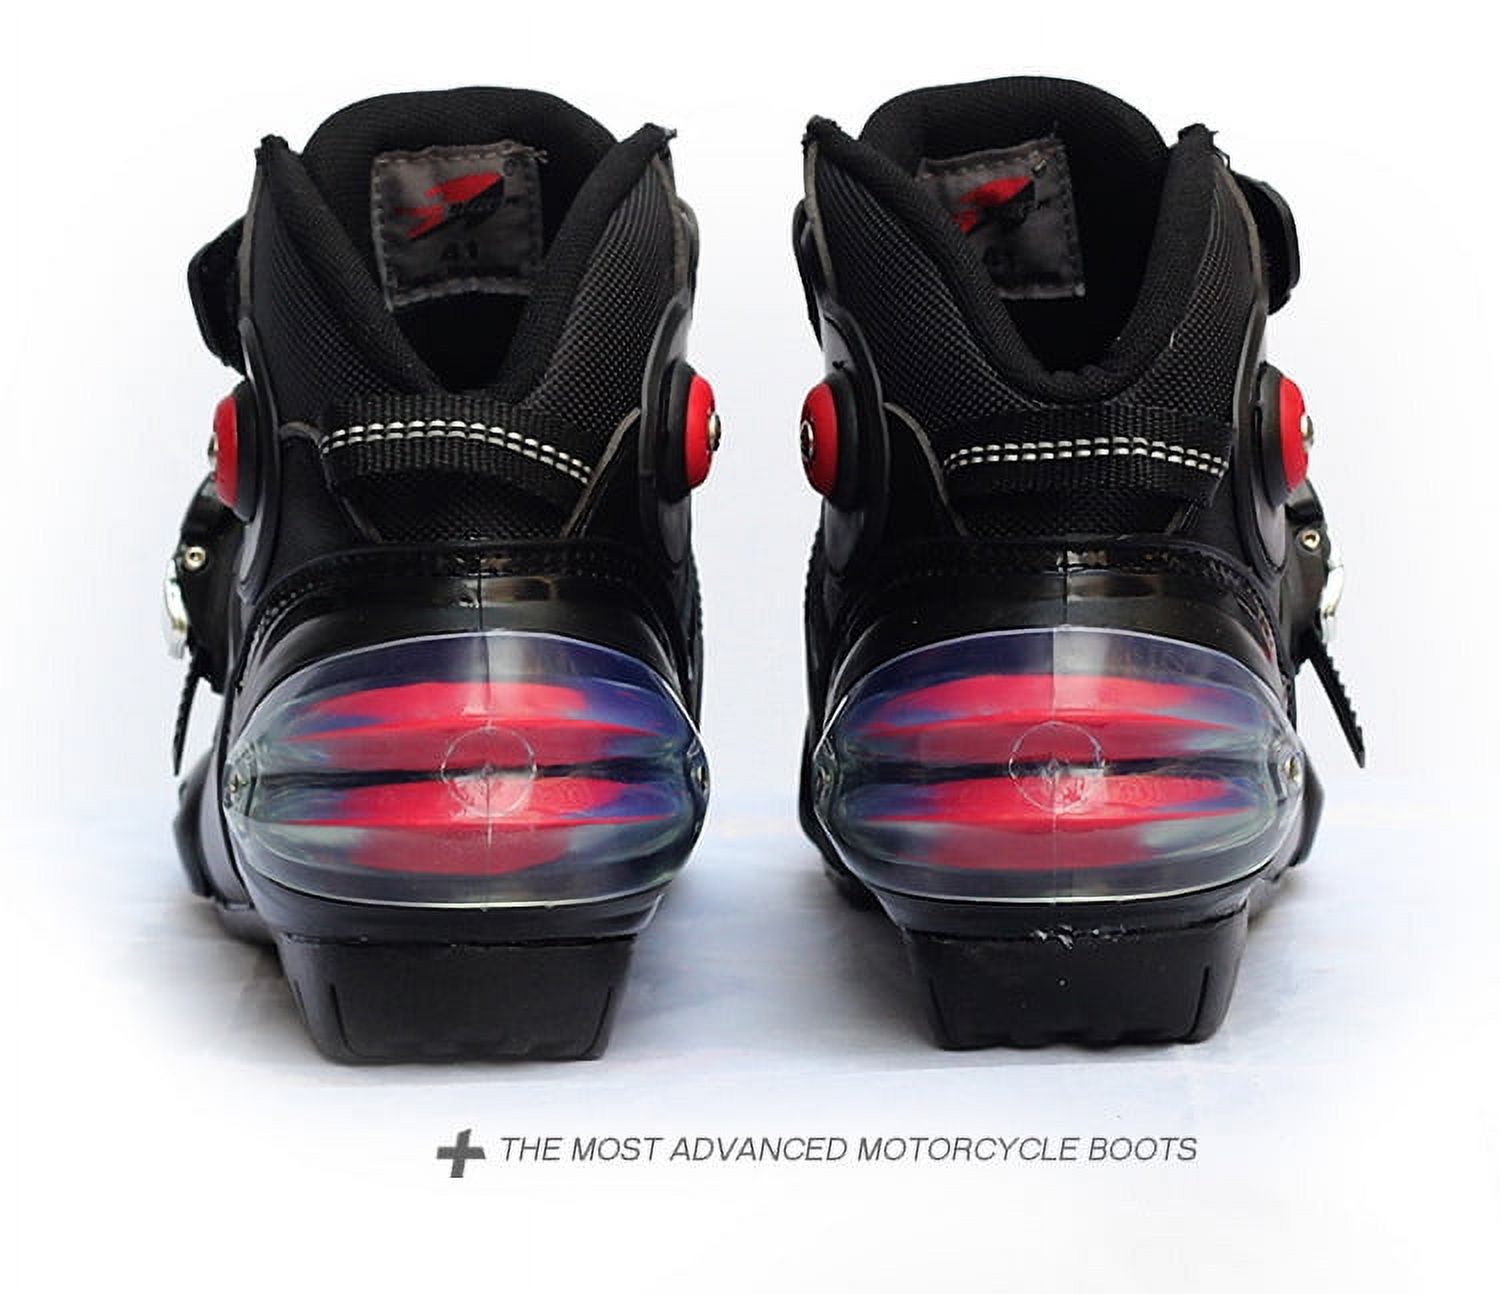 Men Soft Motorcycle Boots Biker Waterproof Speed Motocross Boots Non-slip Motorcycle Shoes Color:black Shoe US Size:9.5 - image 3 of 8